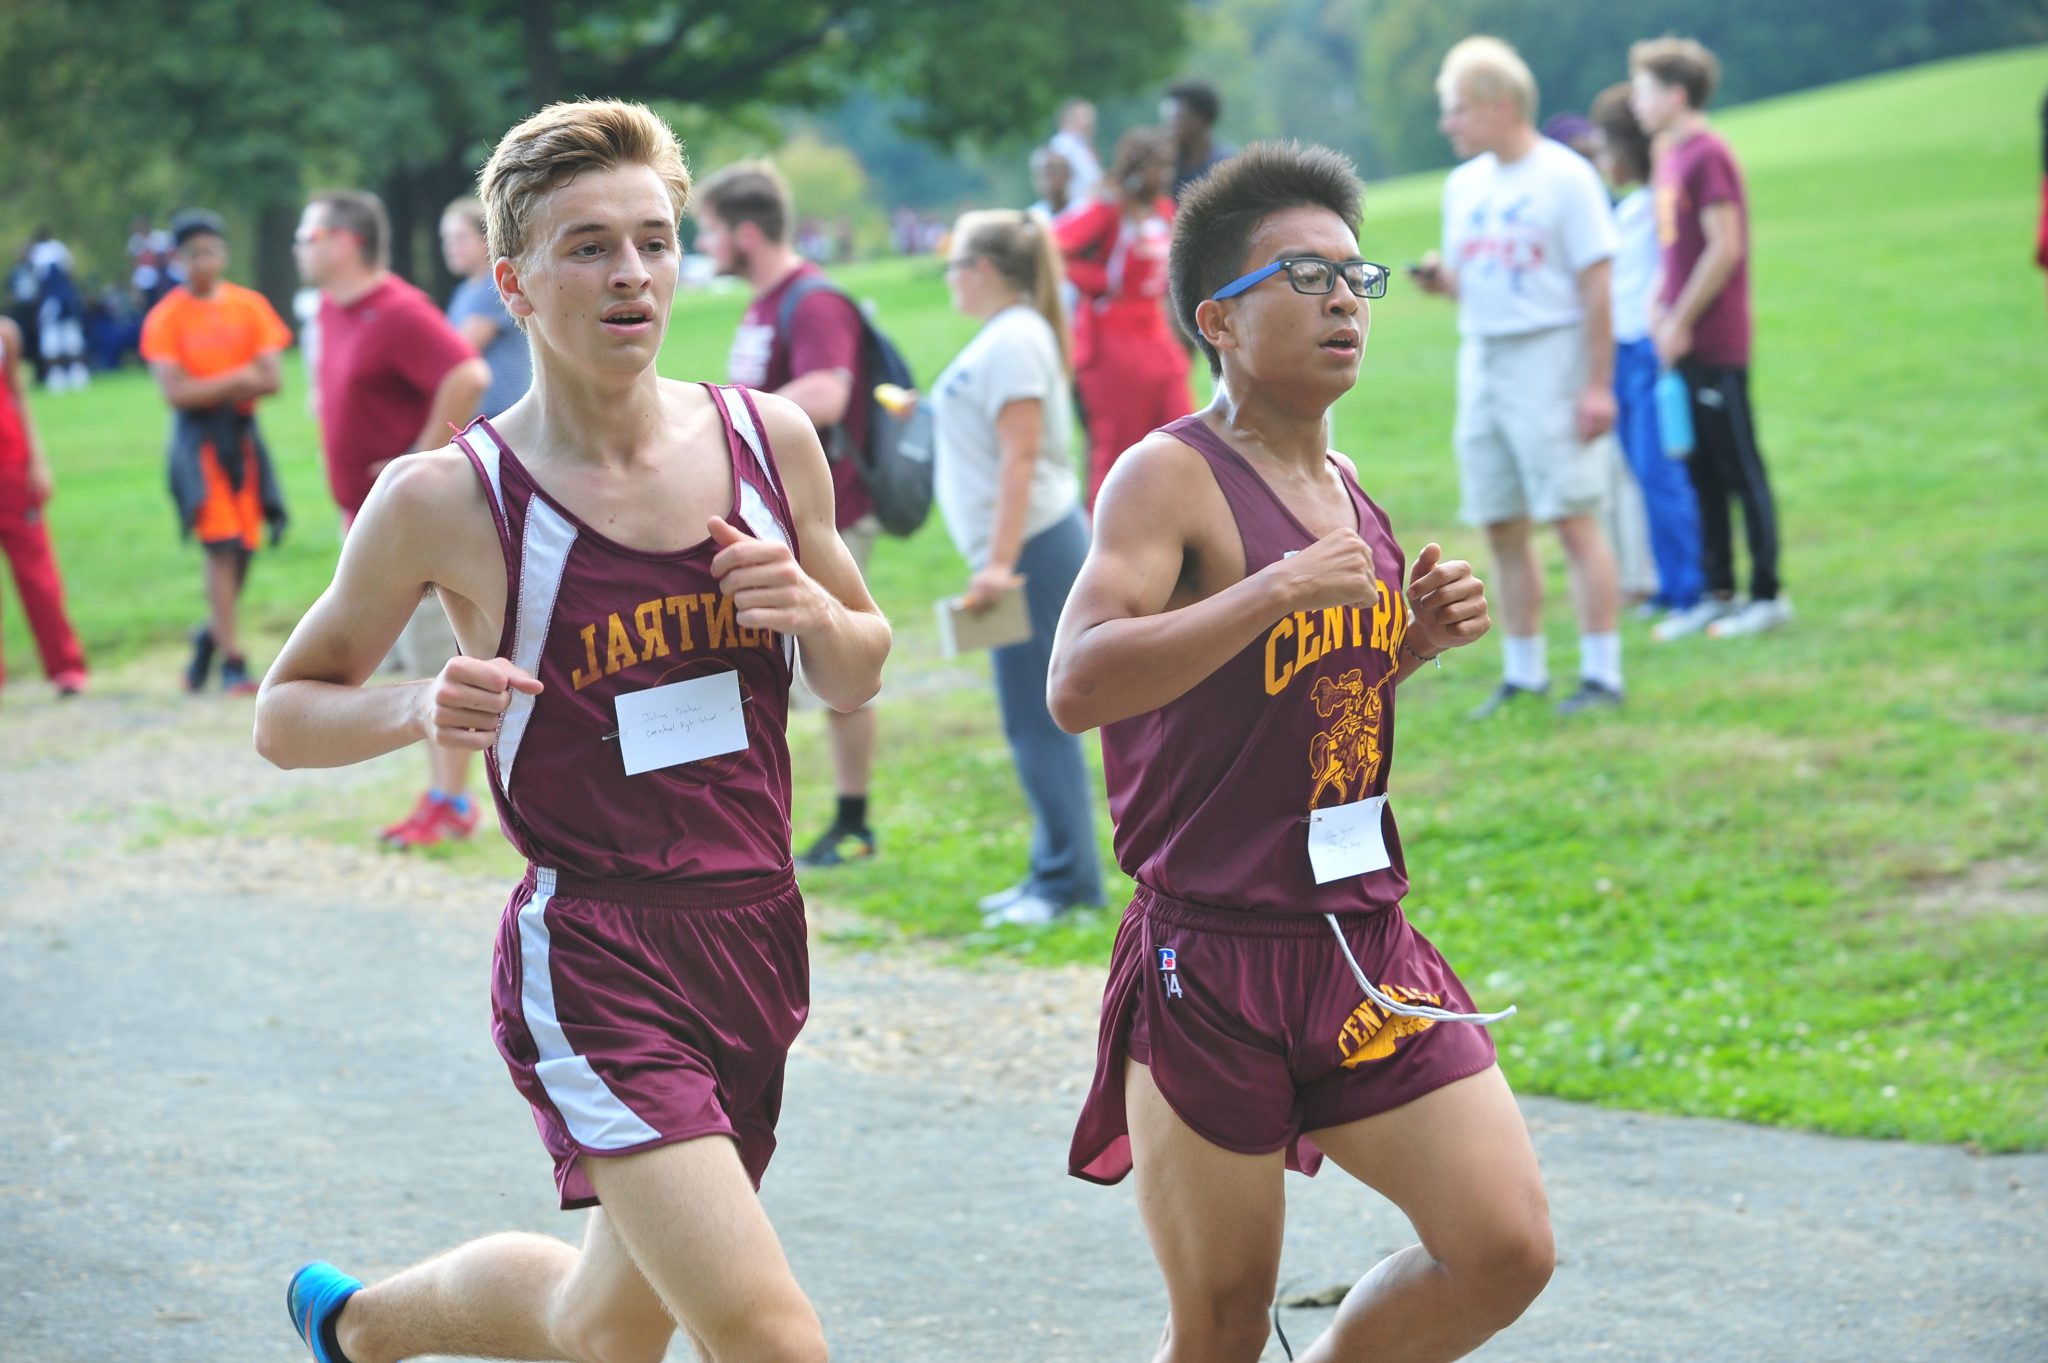 Two Central teammates running cross country